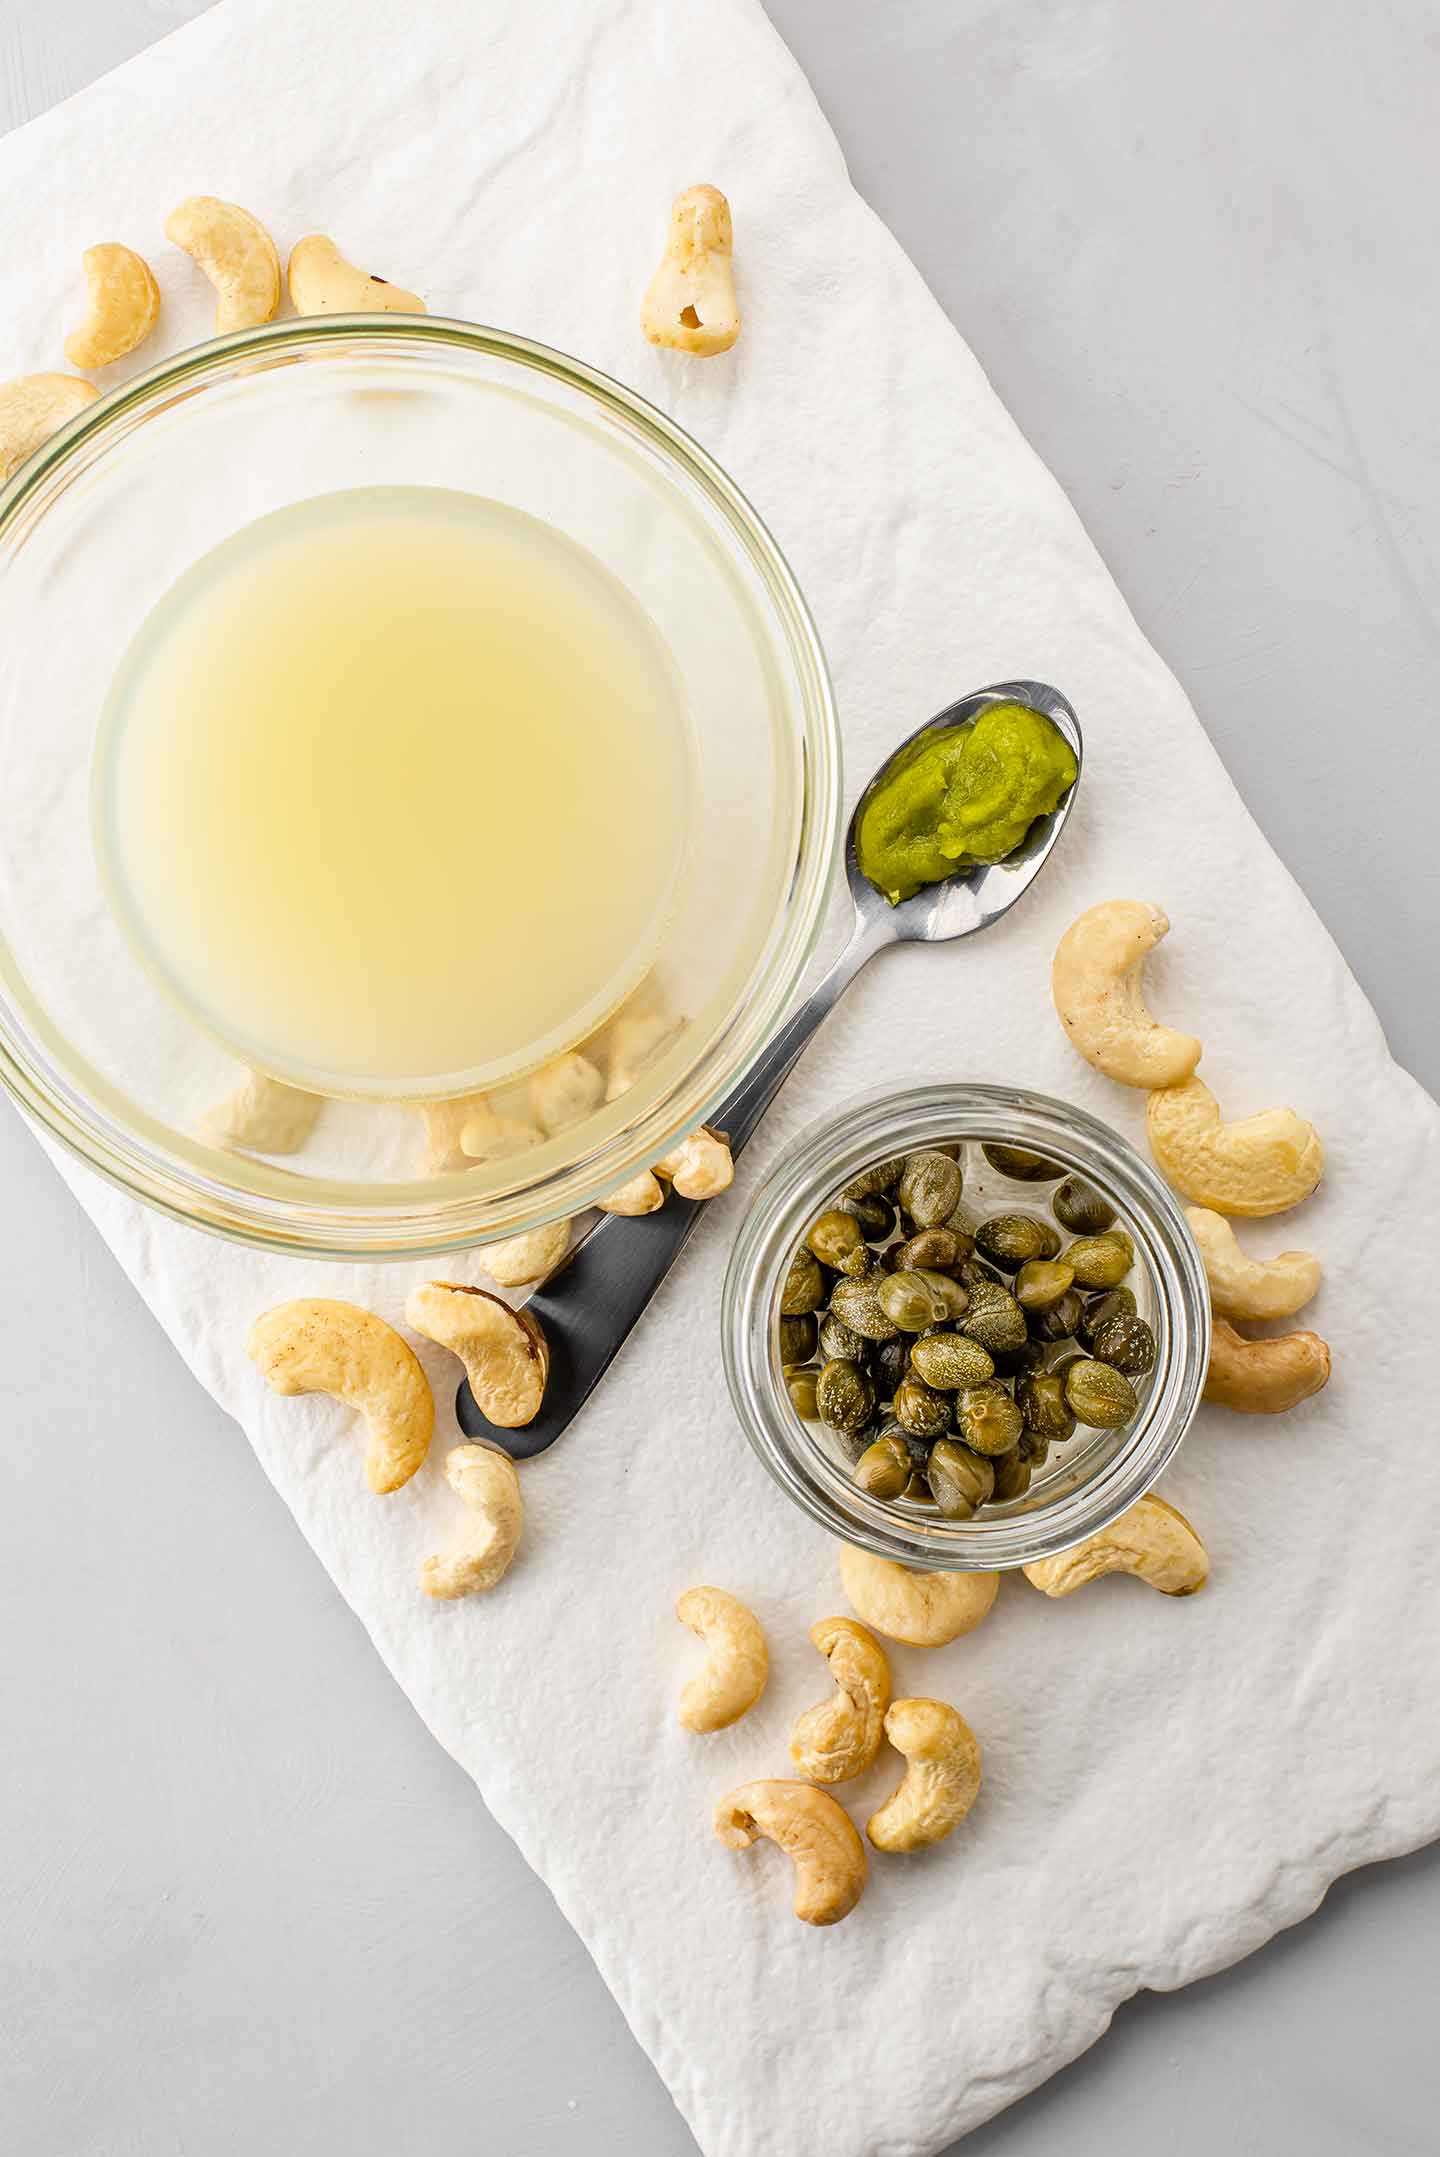 Lemon juice in a bowl, wasabi on a teaspoon, capers in a small jar and scattered raw cashews are displayed on a white slab